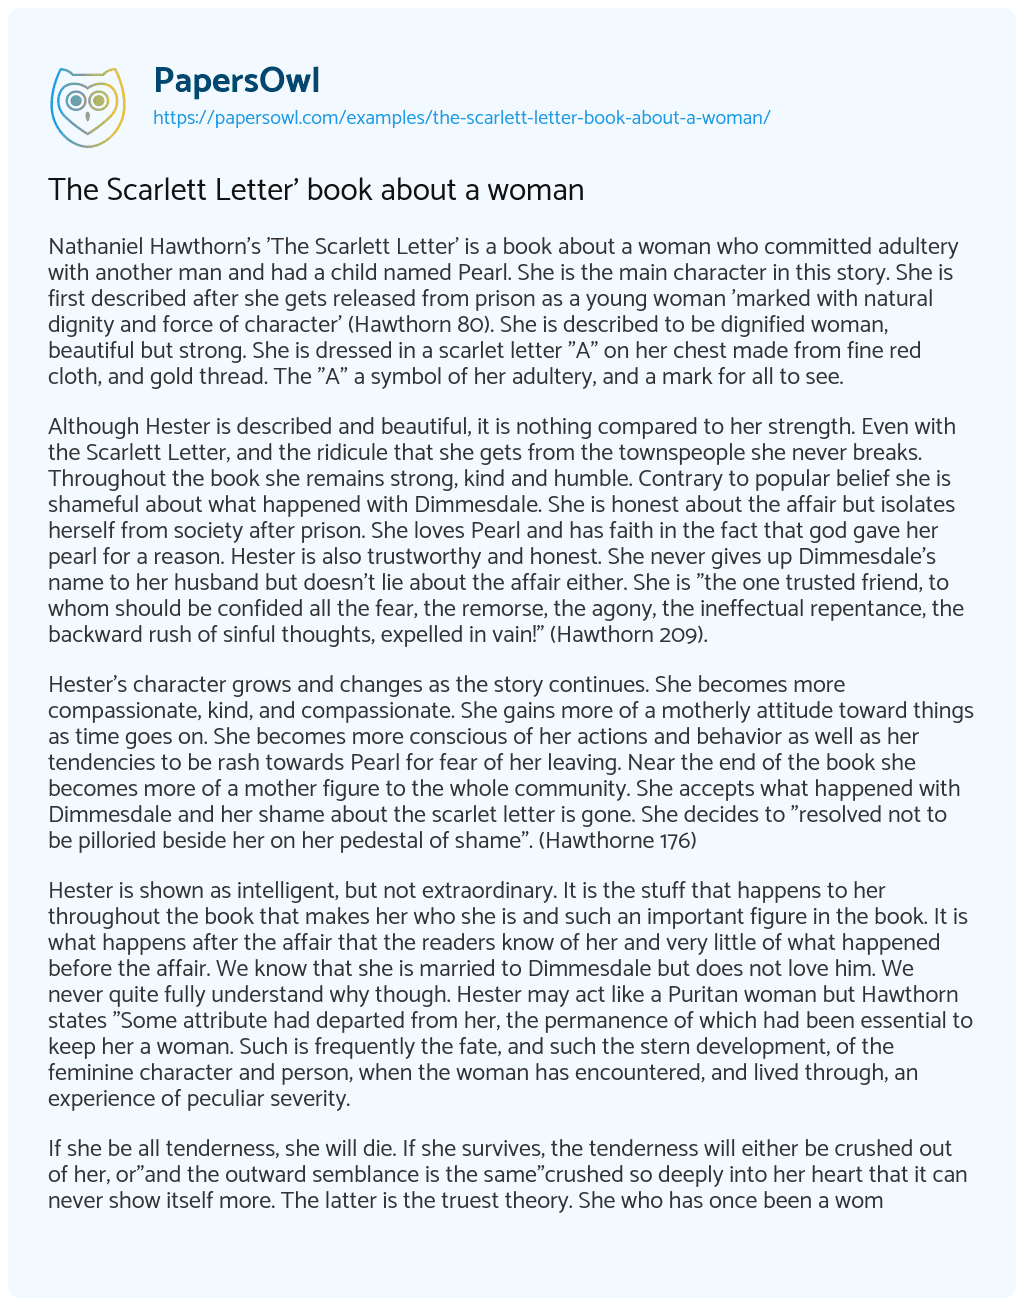 Essay on The Scarlett Letter’ Book about a Woman